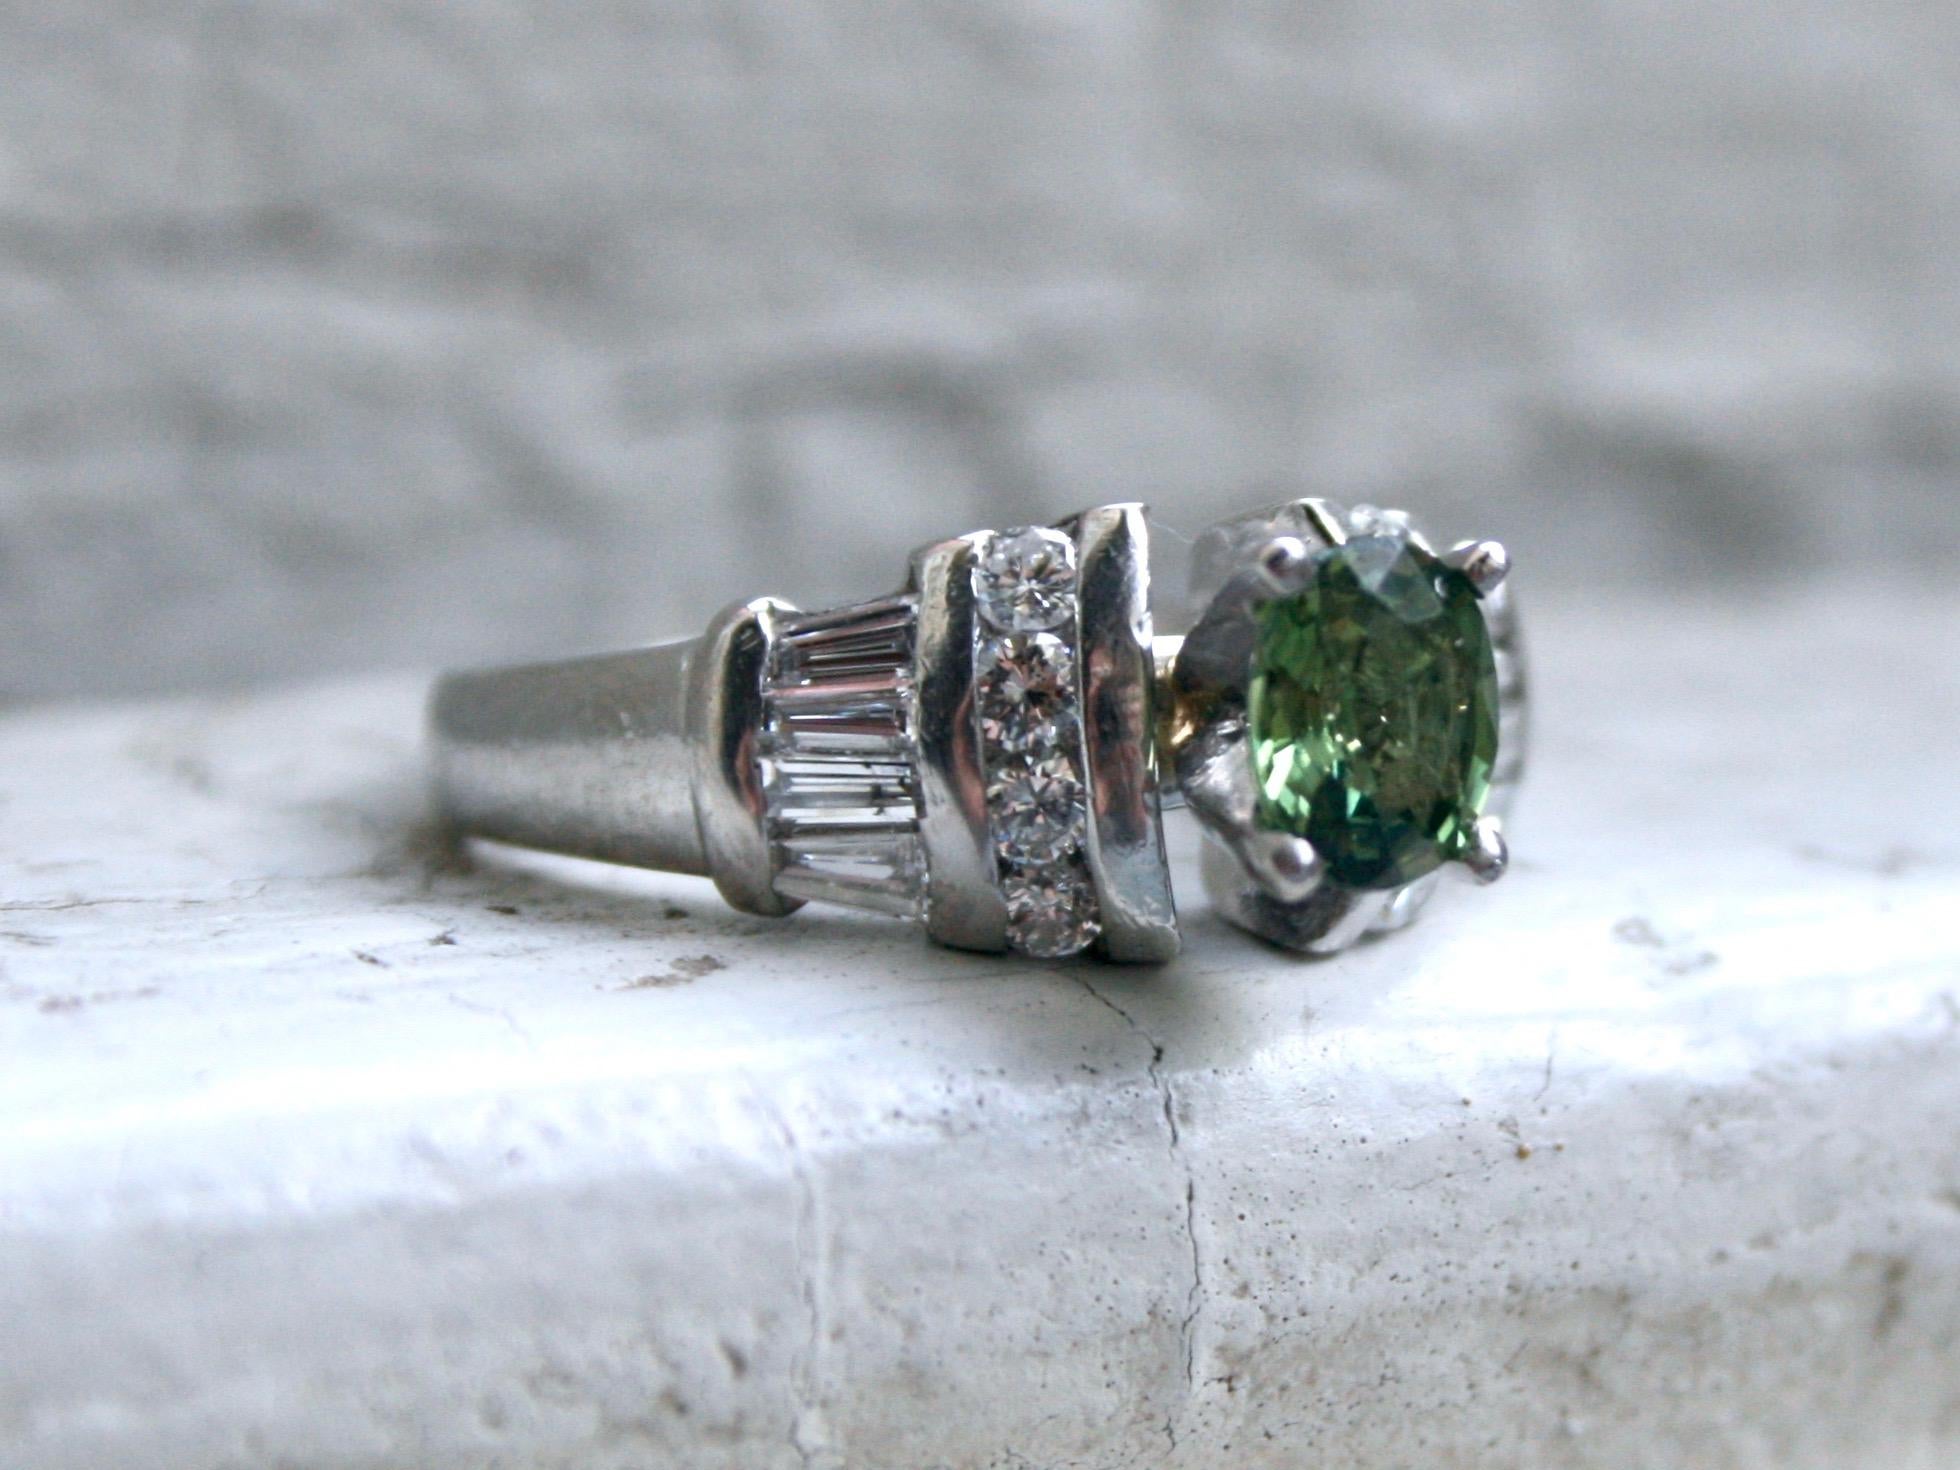 I just can't resist the classic beauty of this Beautiful Vintage Green Sapphire and Diamond Engagement Ring. Crafted in Platinum, the design features a stunning Green Sapphire Center, surrounded by Round Brilliant and Baguette Cut Diamonds. In the